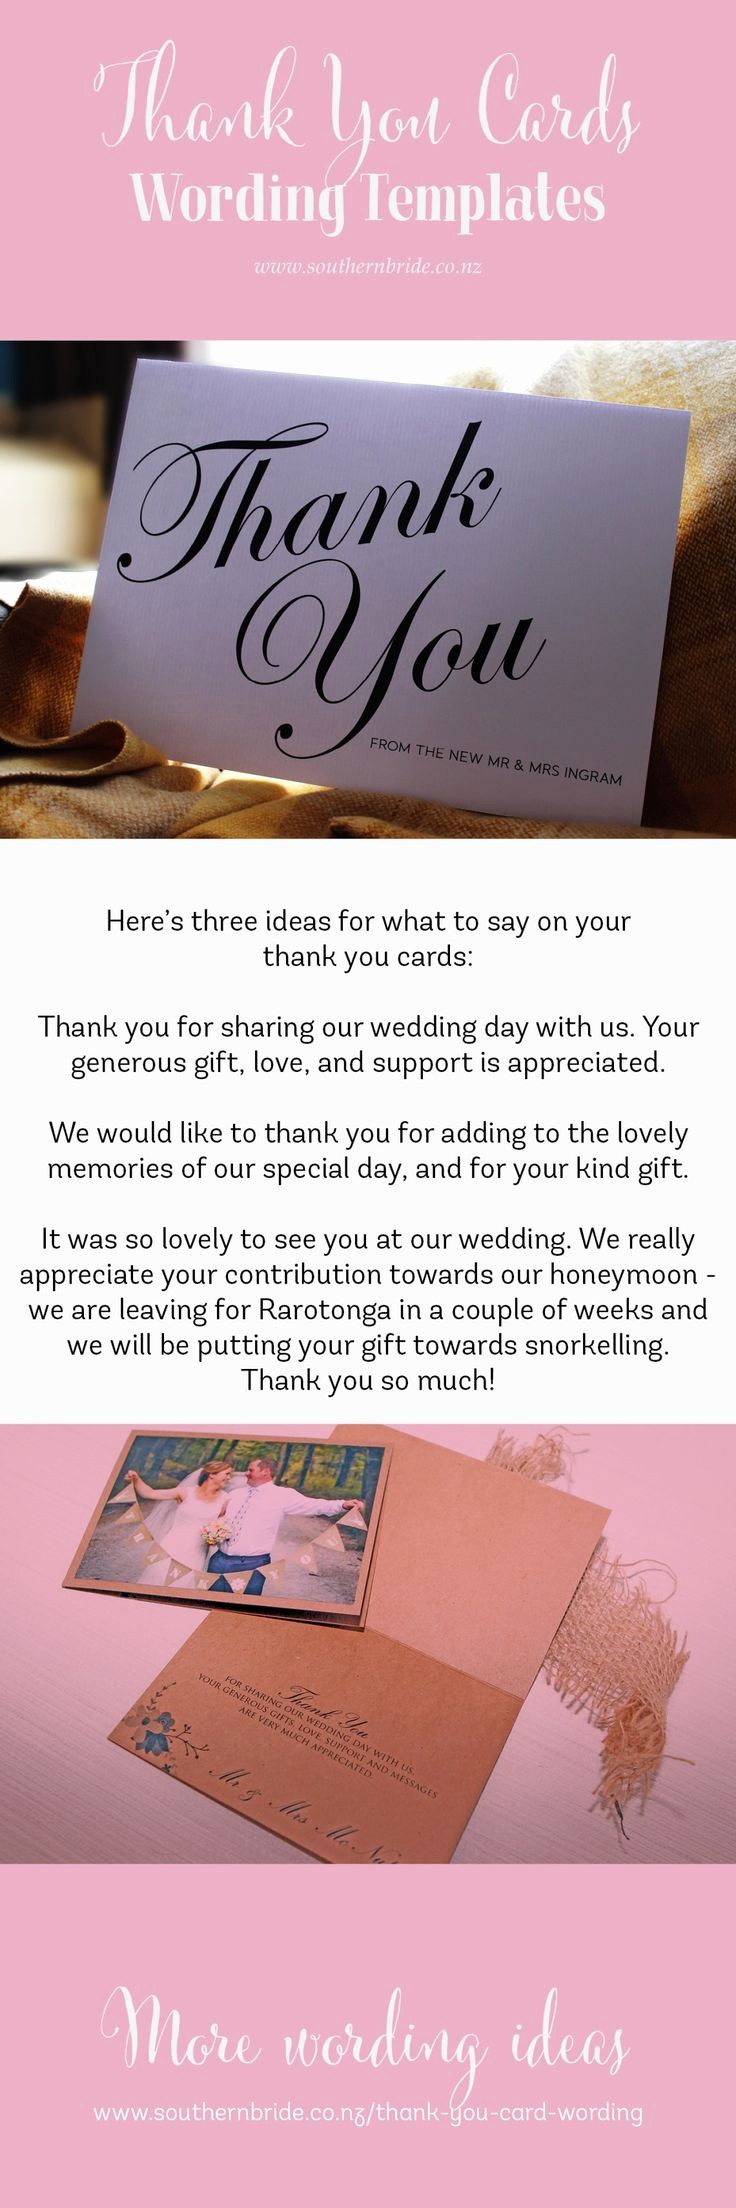 Words for Thank You Card Best Of 1000 Ideas About Thank You Card Wording On Pinterest